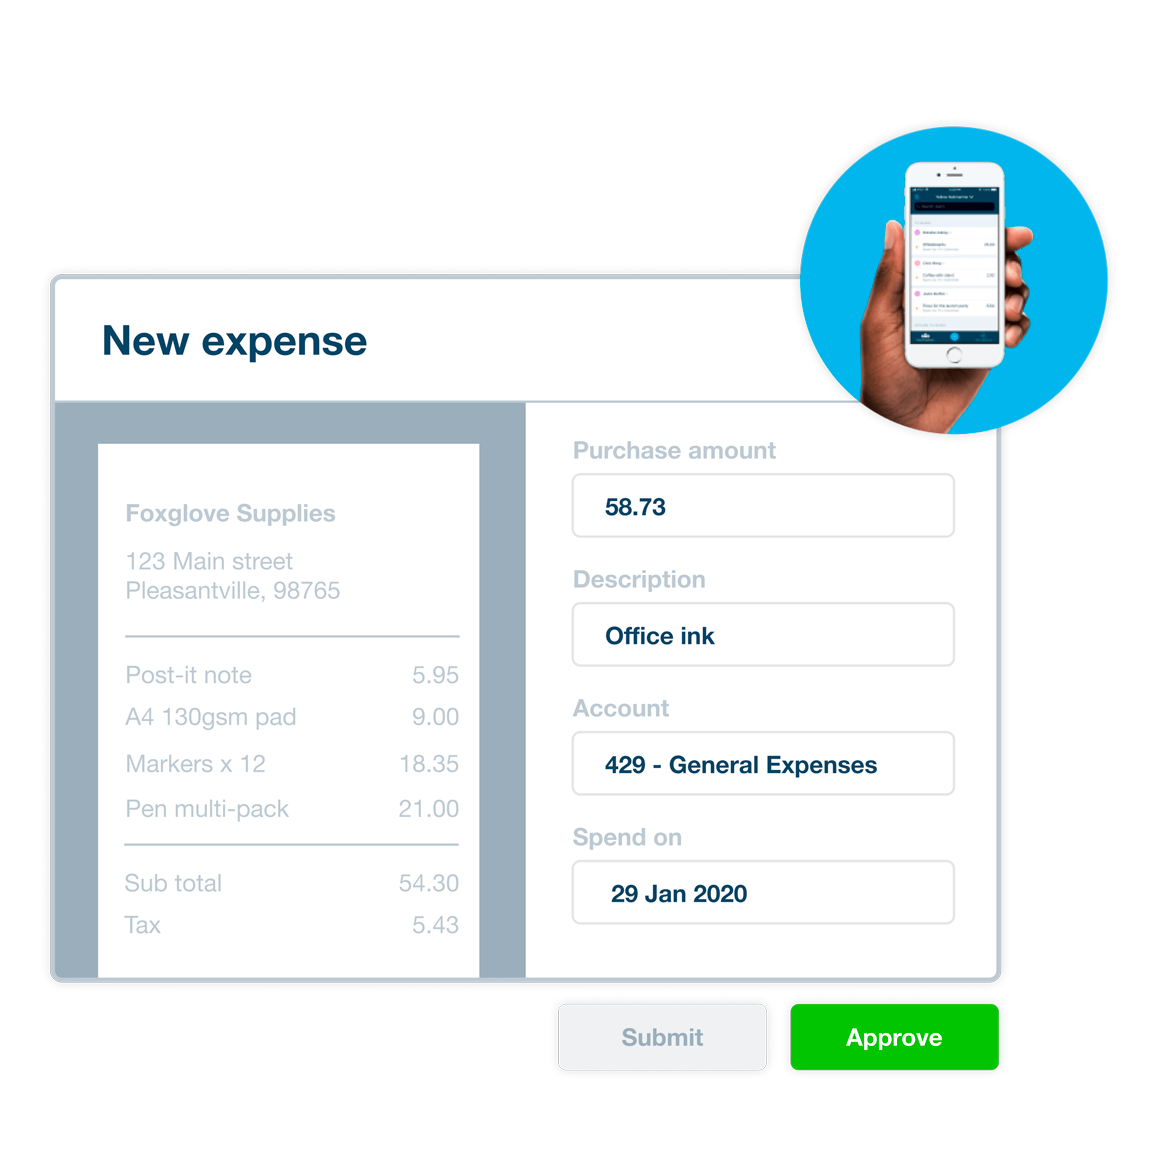 A hand holding a mobile device, showing an example of the Xero Expenses app interface.